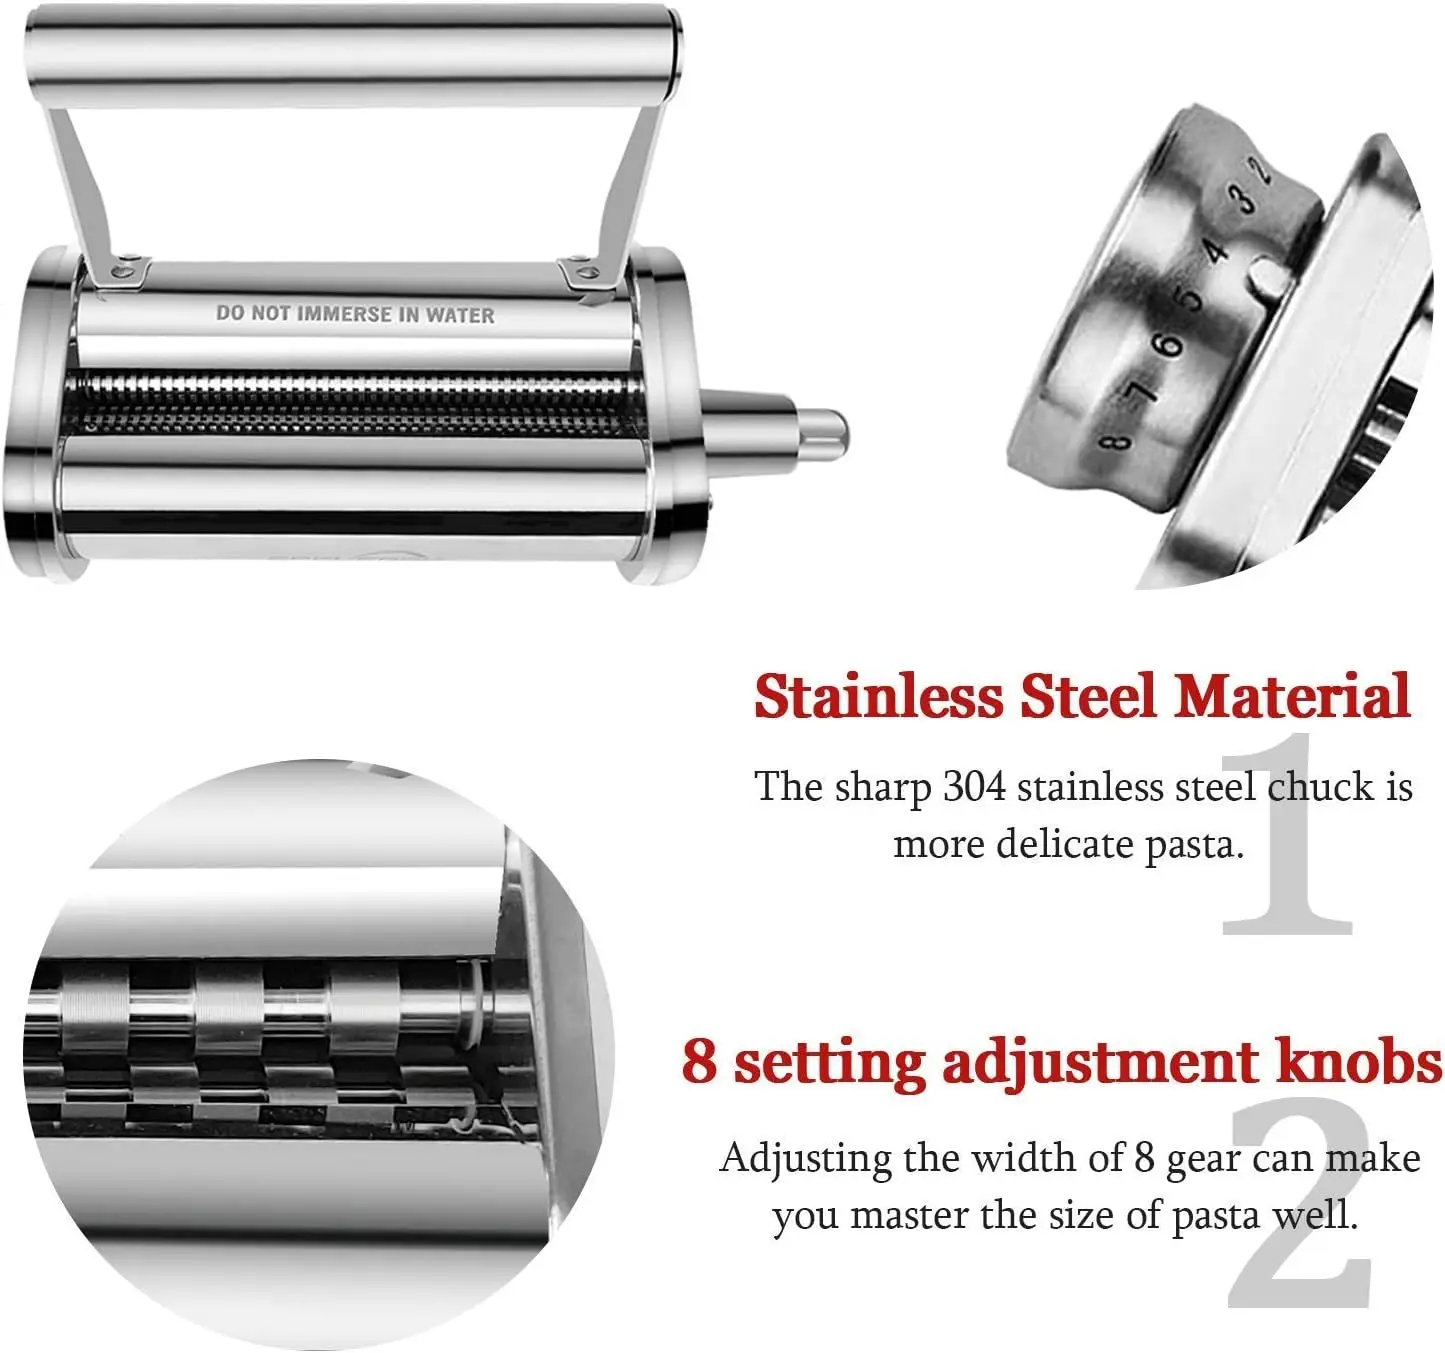 https://ae01.alicdn.com/kf/S0b6599e7d9414a94a8f7726eccb6a8c5t/Pasta-Maker-Attachment-Set-for-KitchenAid-Stand-Mixer-with-Unique-Roller-Pasta-Sheet-Roller-Spaghetti-Cutter.jpg